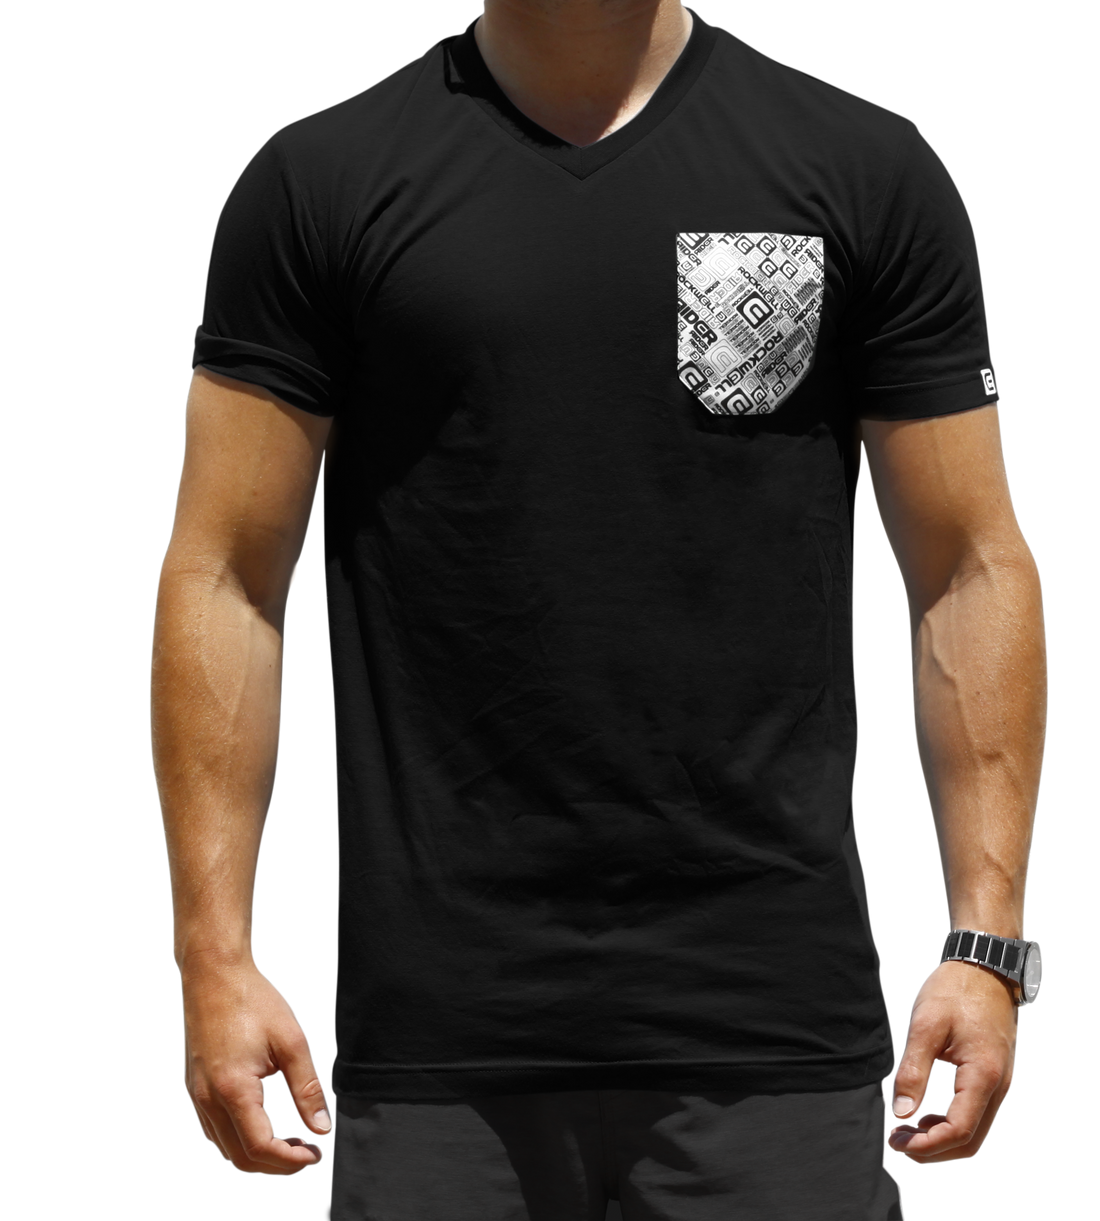 Man wearing Men's black Boss V-Neck with white chest pocket with Rockwell logo on it